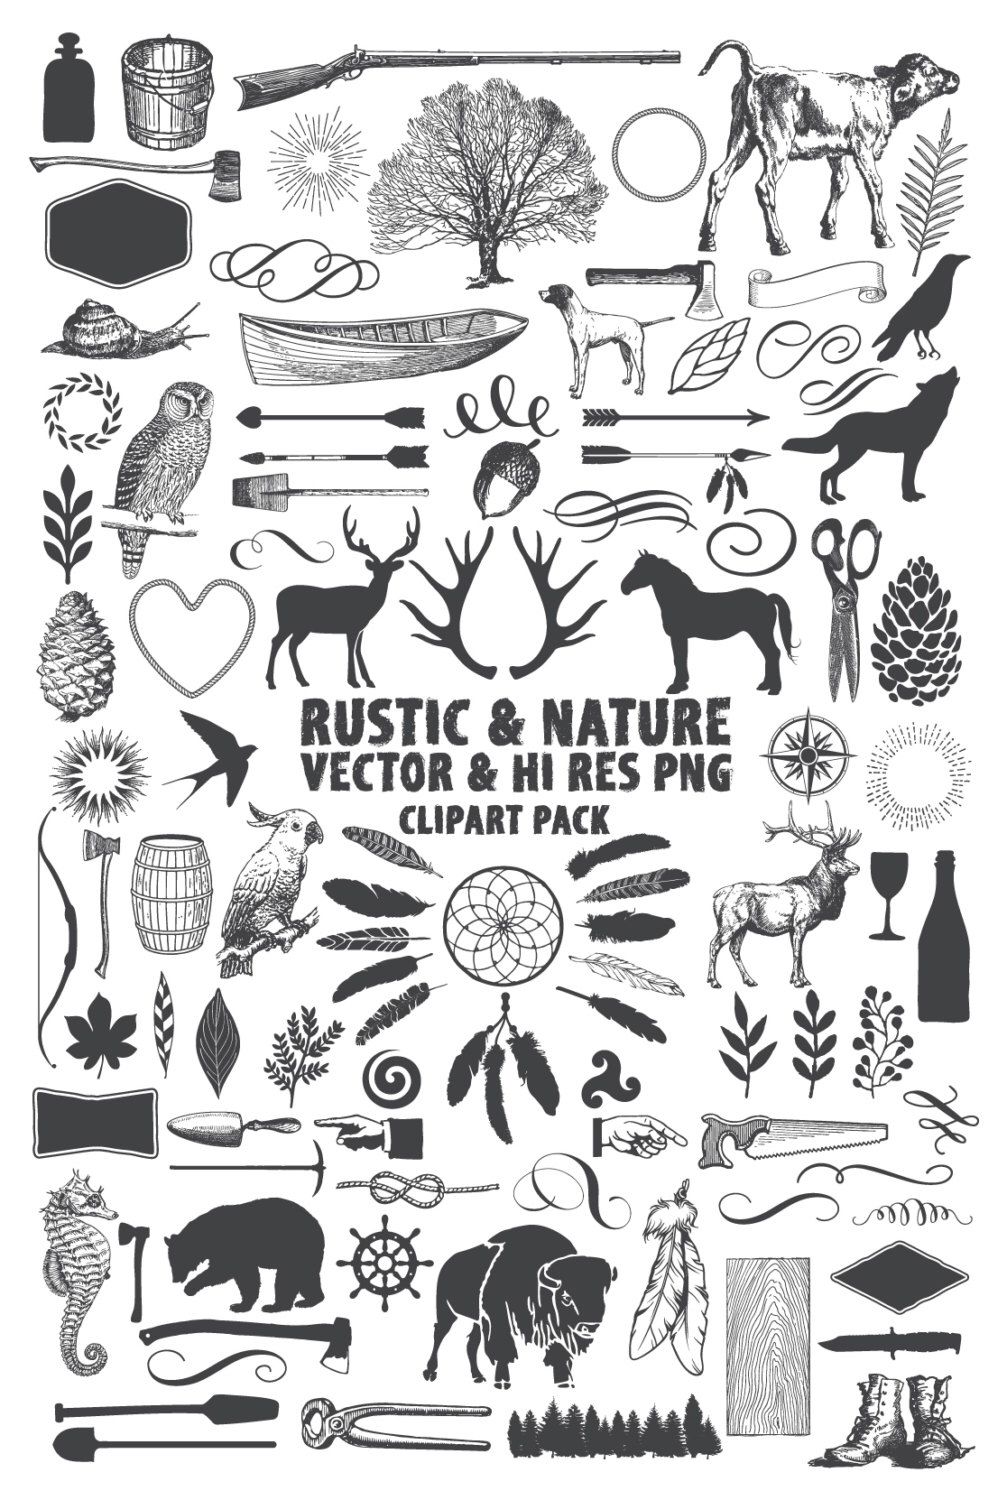 Rustic Clipart Pack.